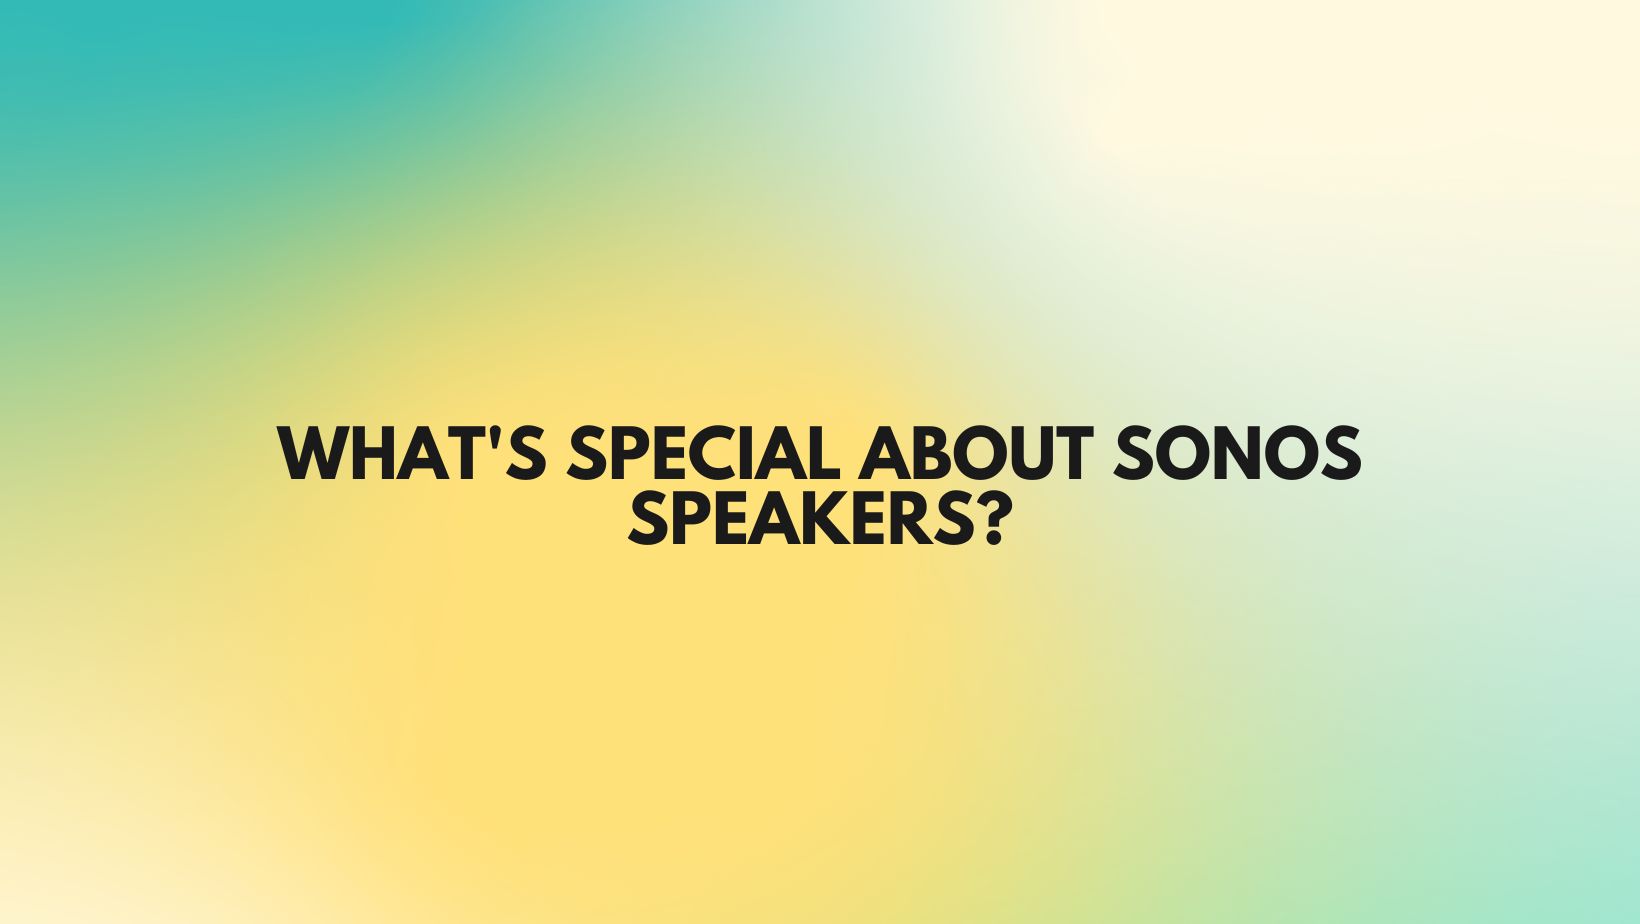 What's special about Sonos speakers?